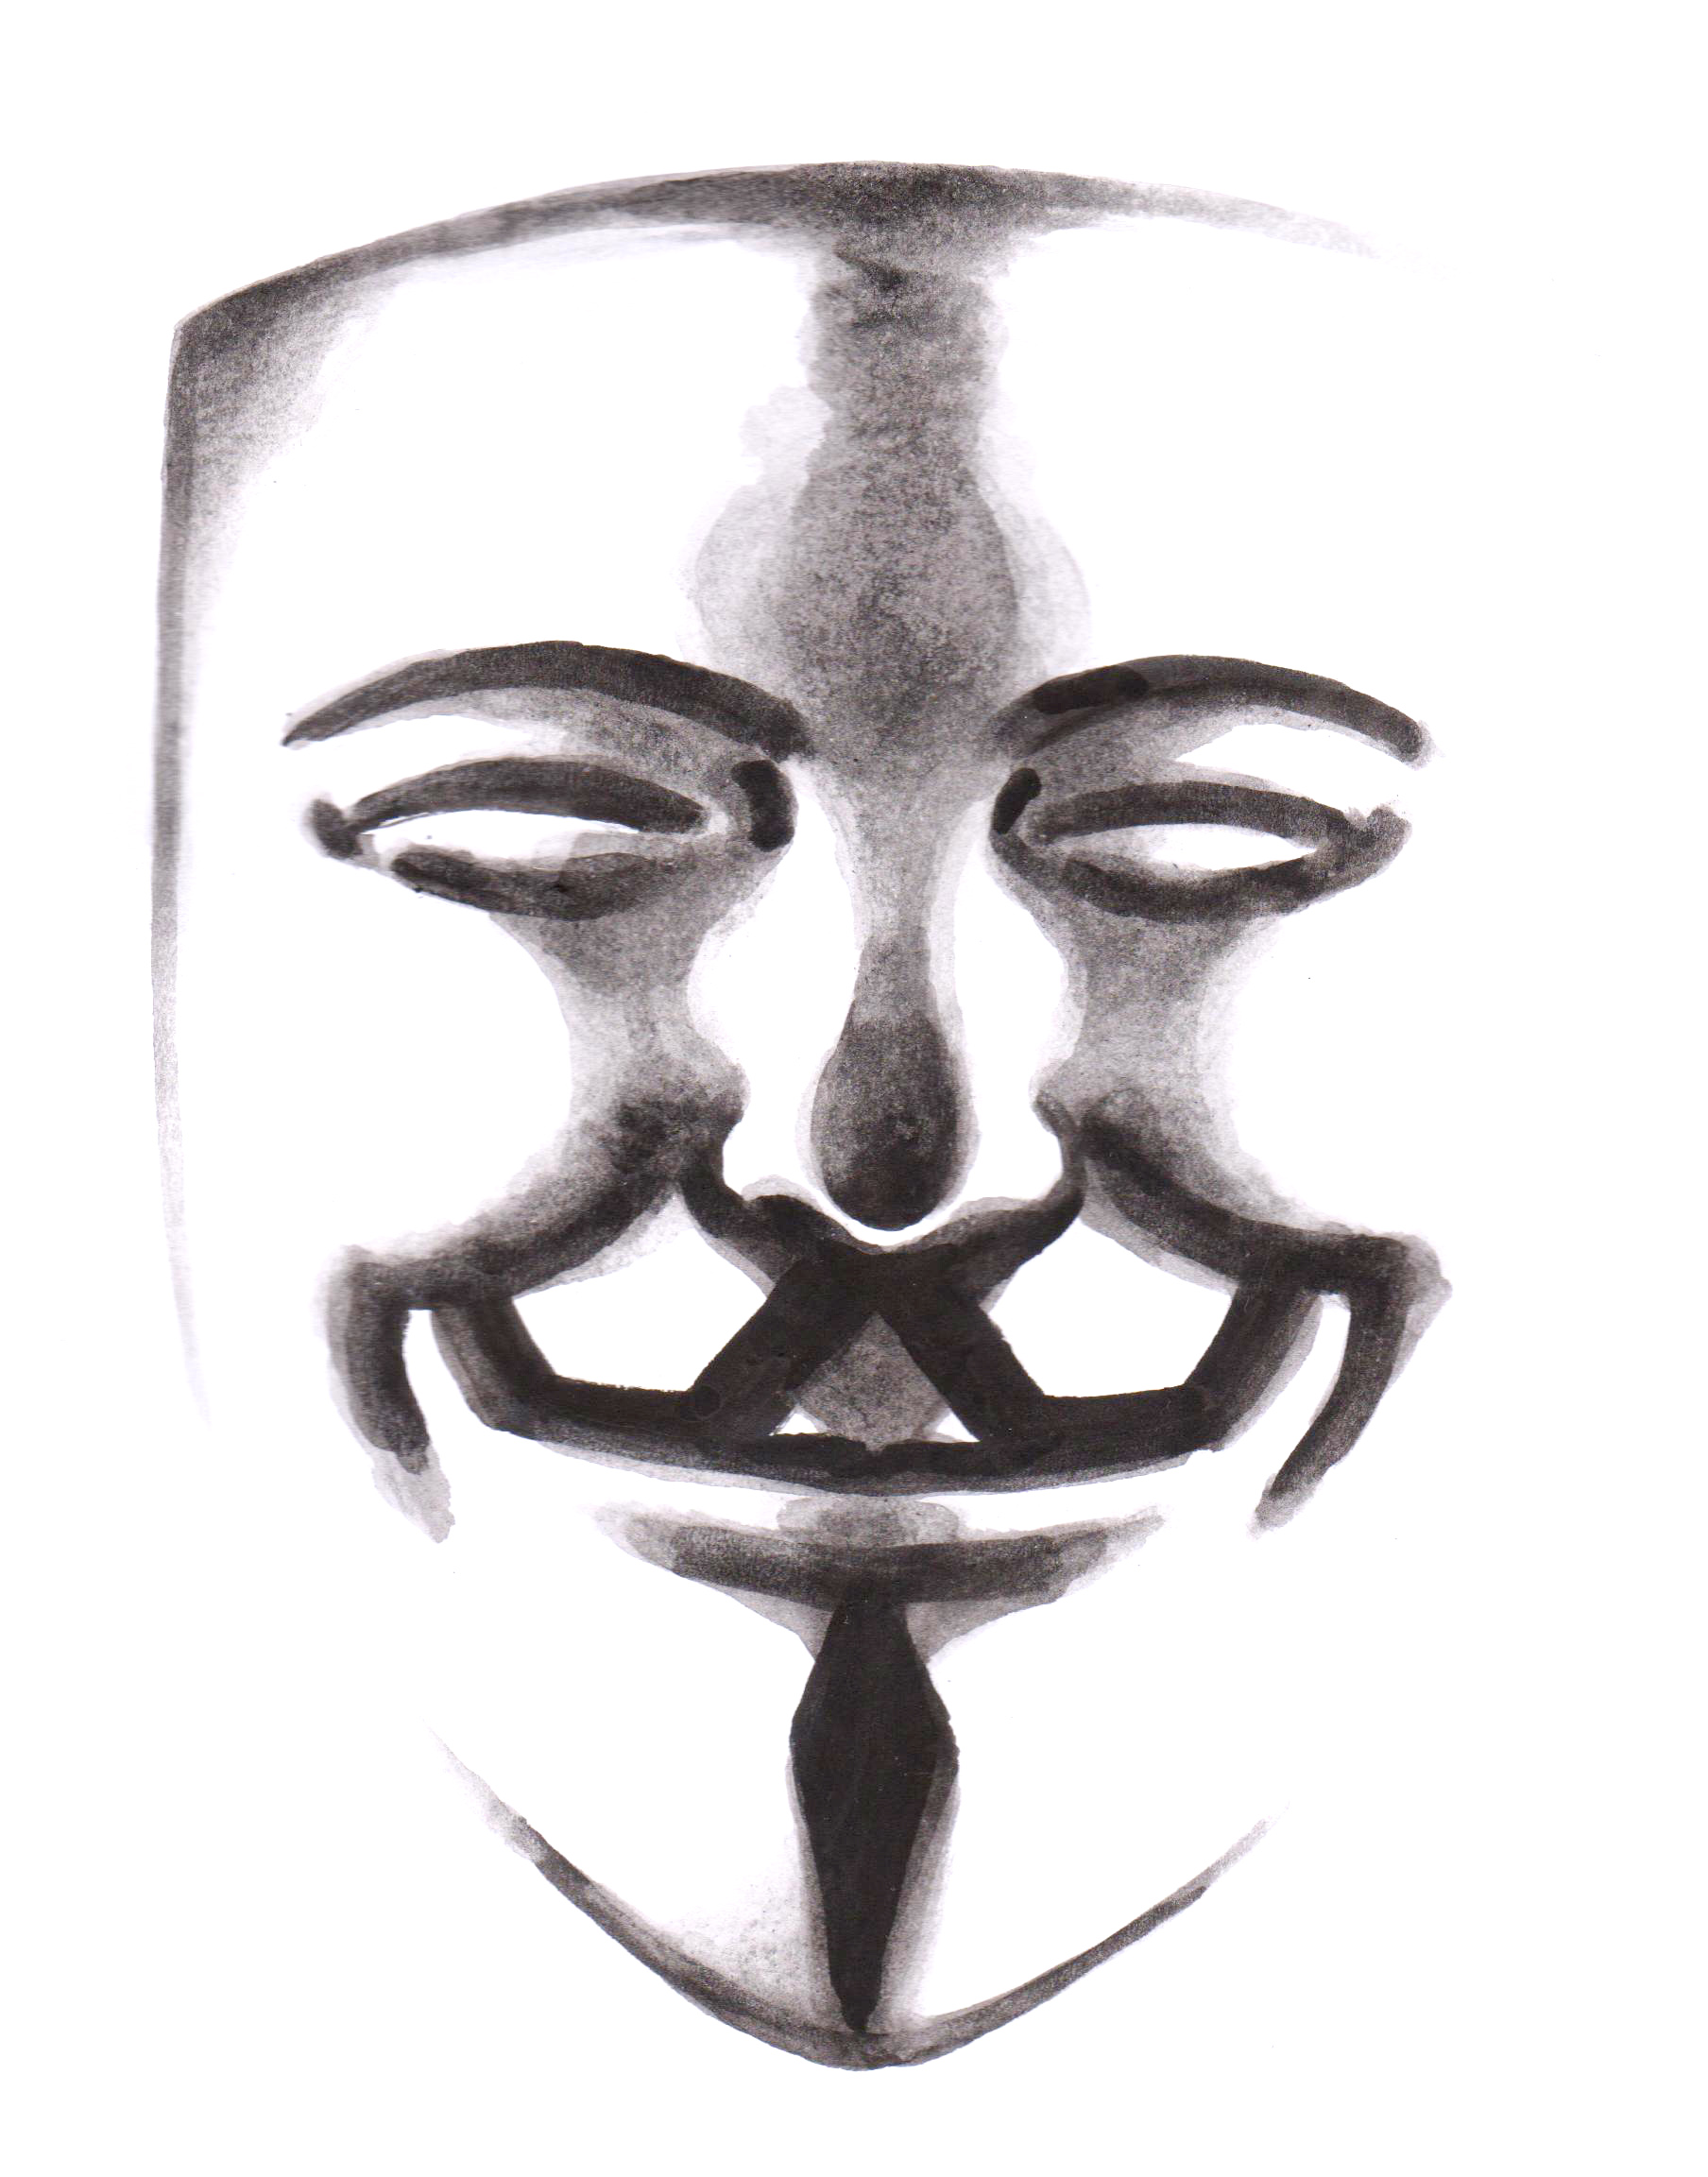 Sydøst Luminans betale sig Exclusive: David Lloyd's unseen drafts of iconic V for Vendetta mask - The  Big Issue